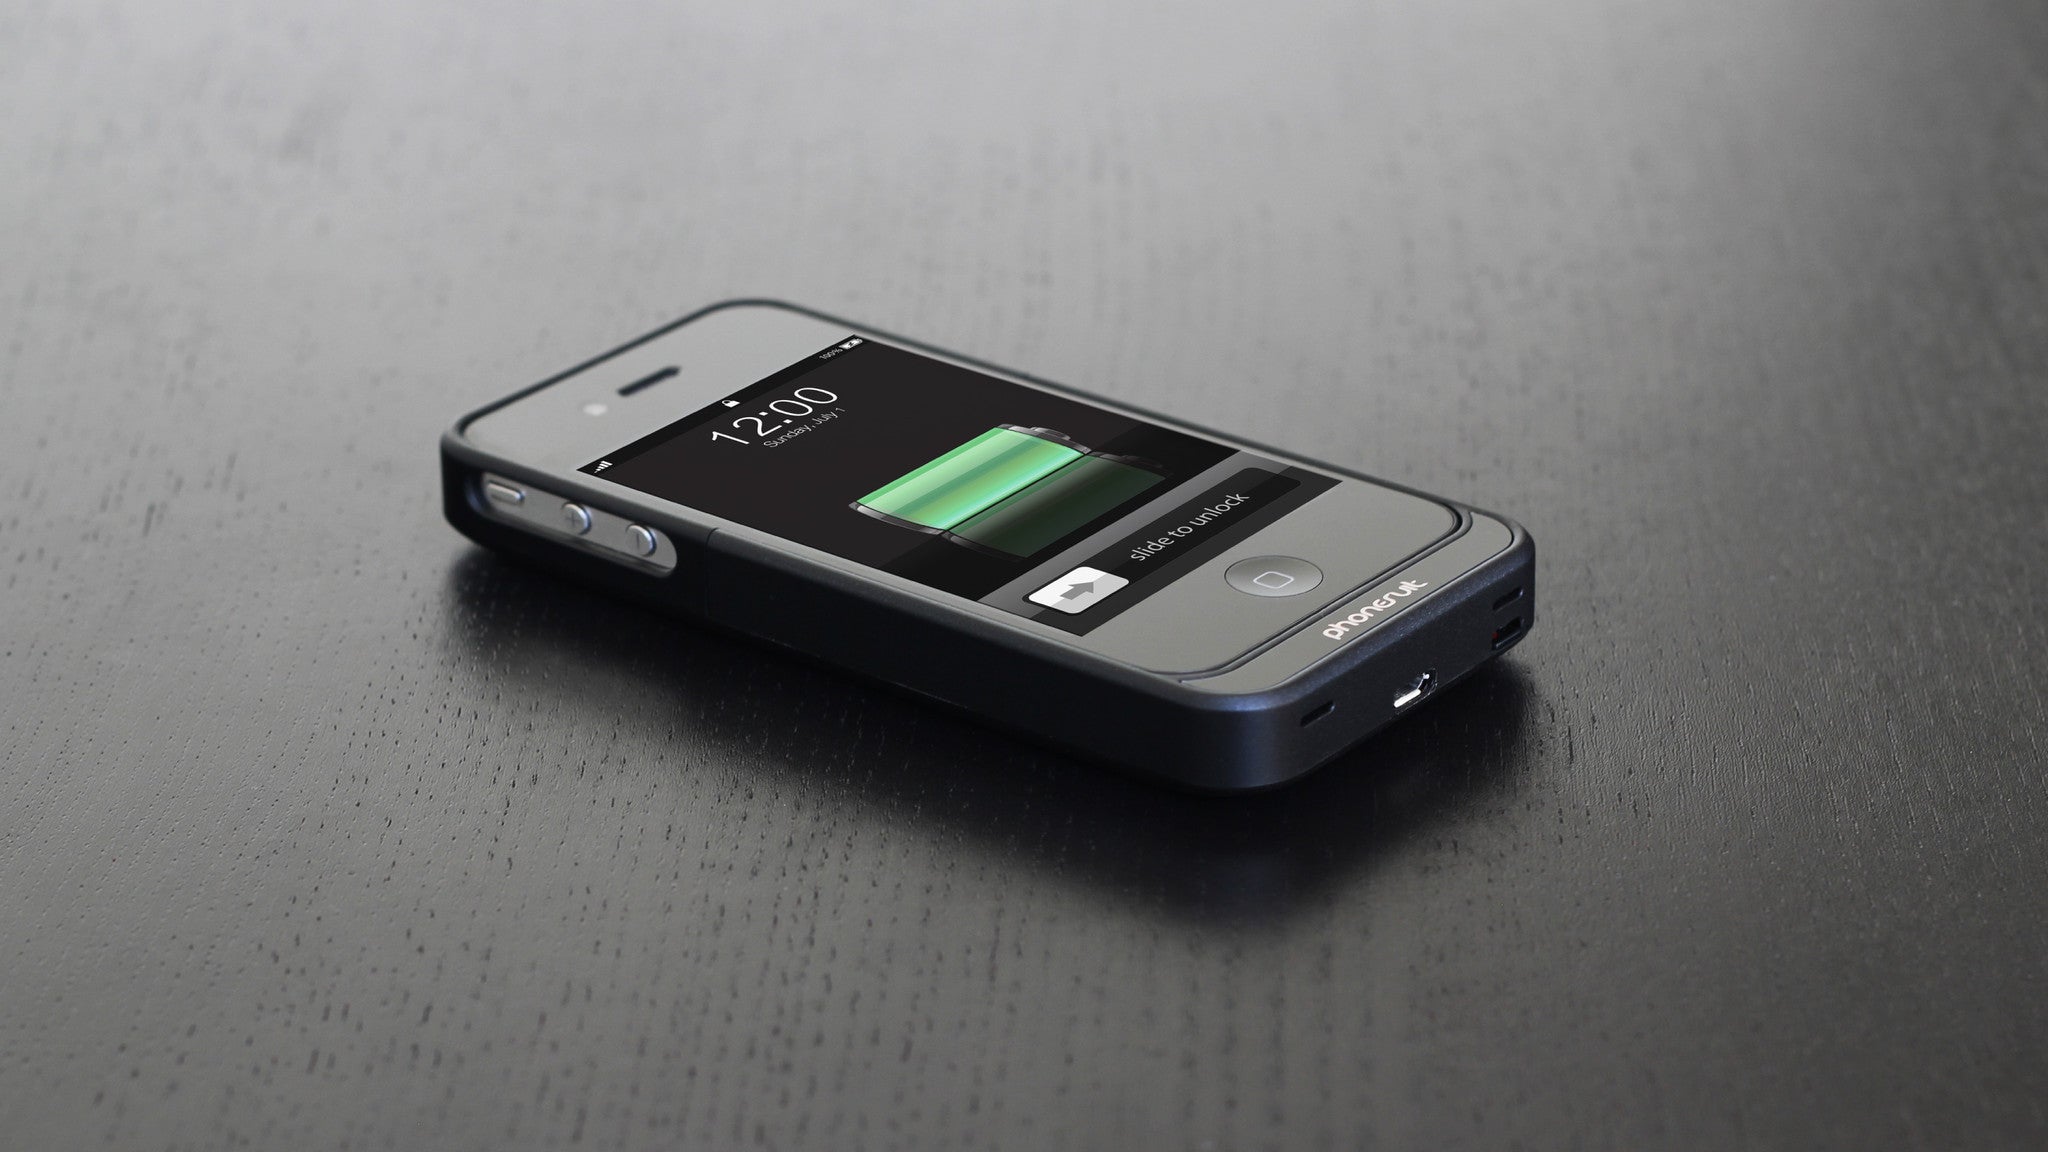 PhoneSuit Elite 4 Battery Case charges the iPhone 4s